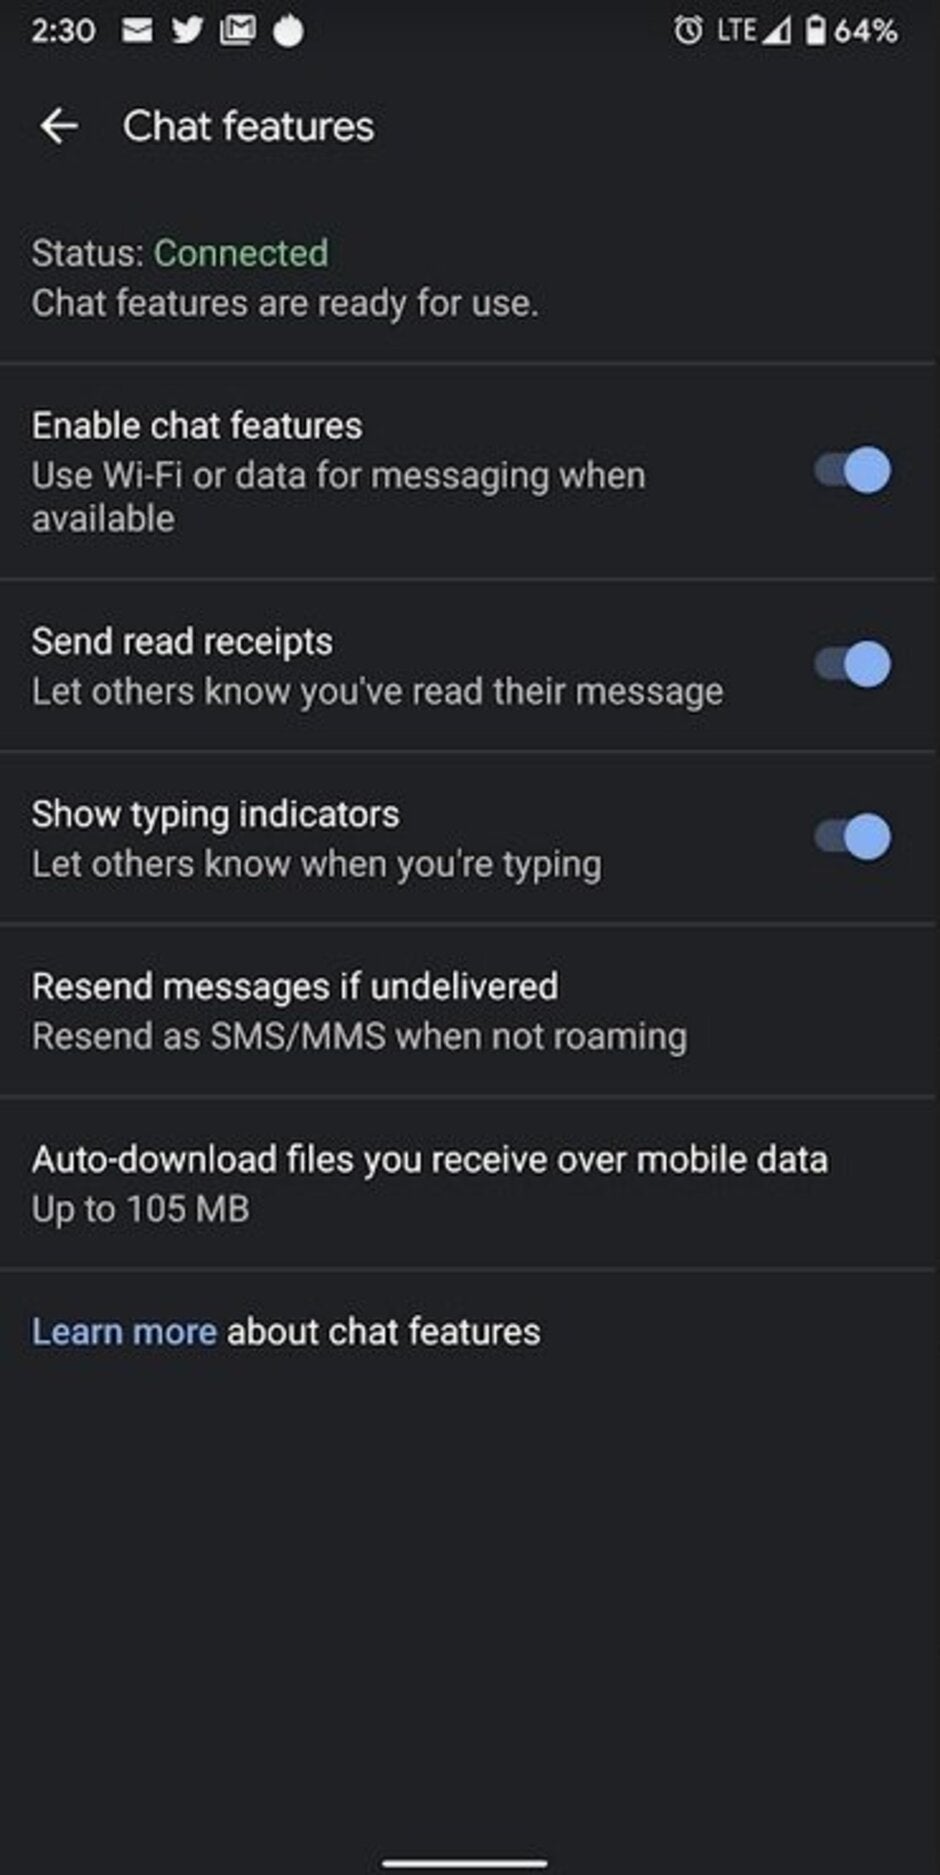 Example of a phone still connected to RCS - Several Android phones have had the RCS messaging hack disabled